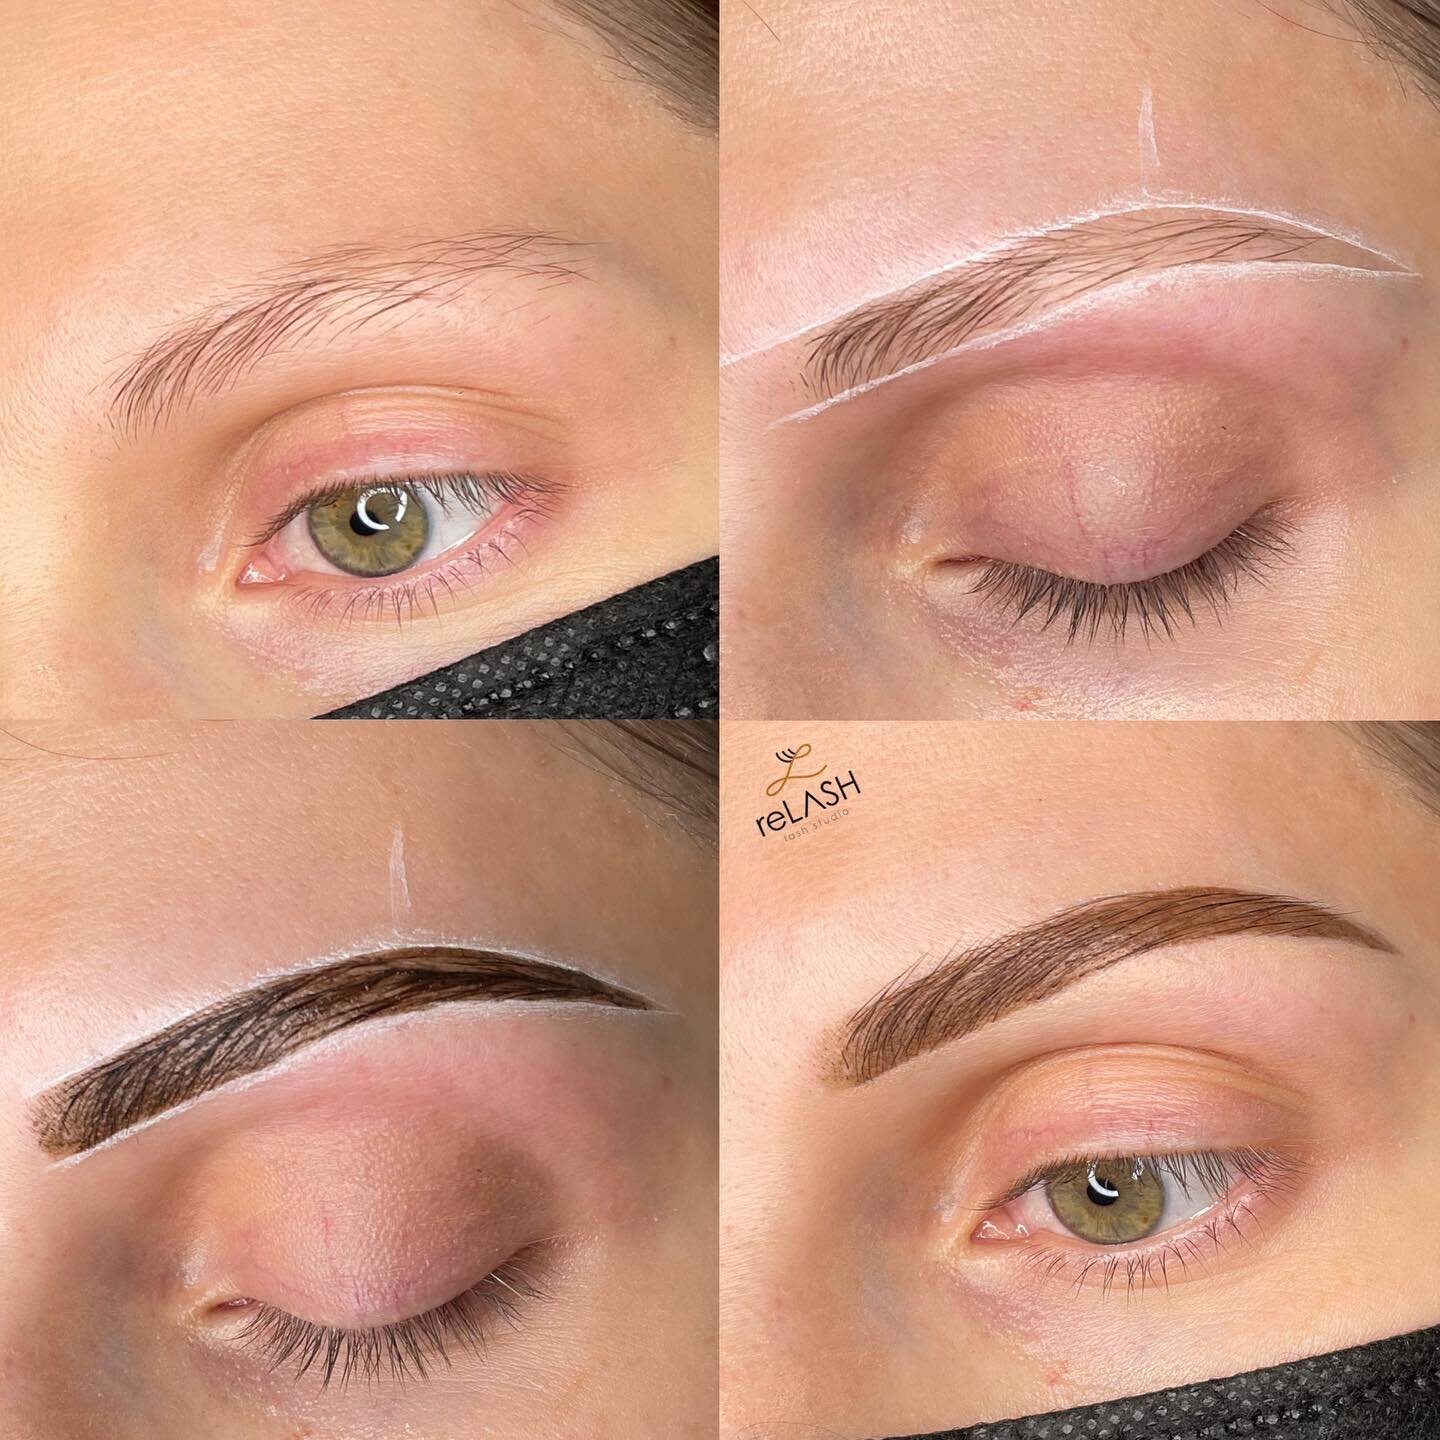 Brow Tint + Brow Shaping step by step

Who is this service for?

&bull; Brow Tint + Brow Shaping is the perfect service for someone who wants to enhance the color of their natural brows.

Is it painful?

&bull; Absolutely not! 100% pain free service.